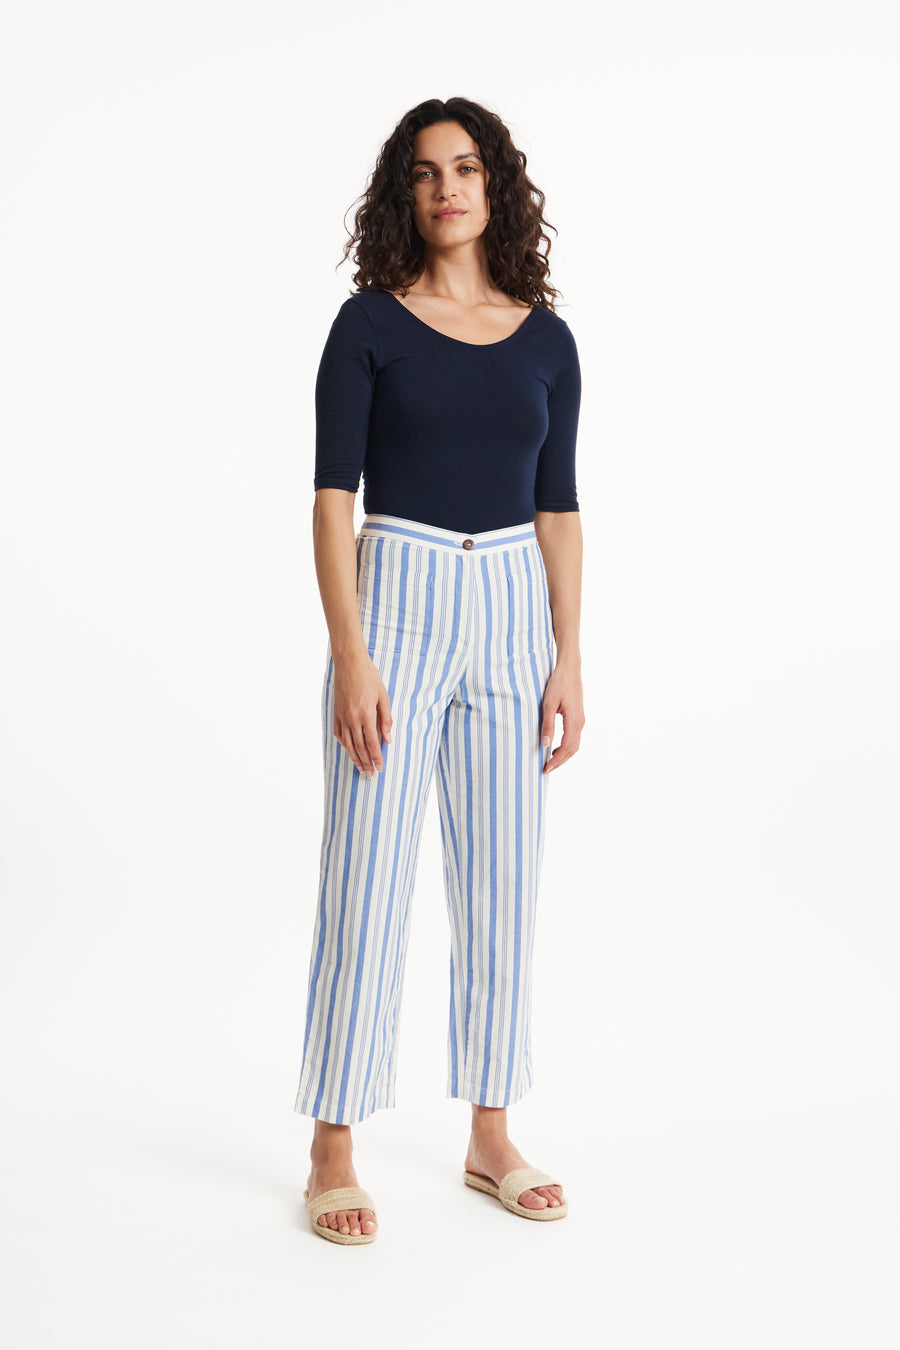 People Tree Fair Trade, Ethical & Sustainable Reese Striped Trousers in Blue stripe 100% Organic Cotton